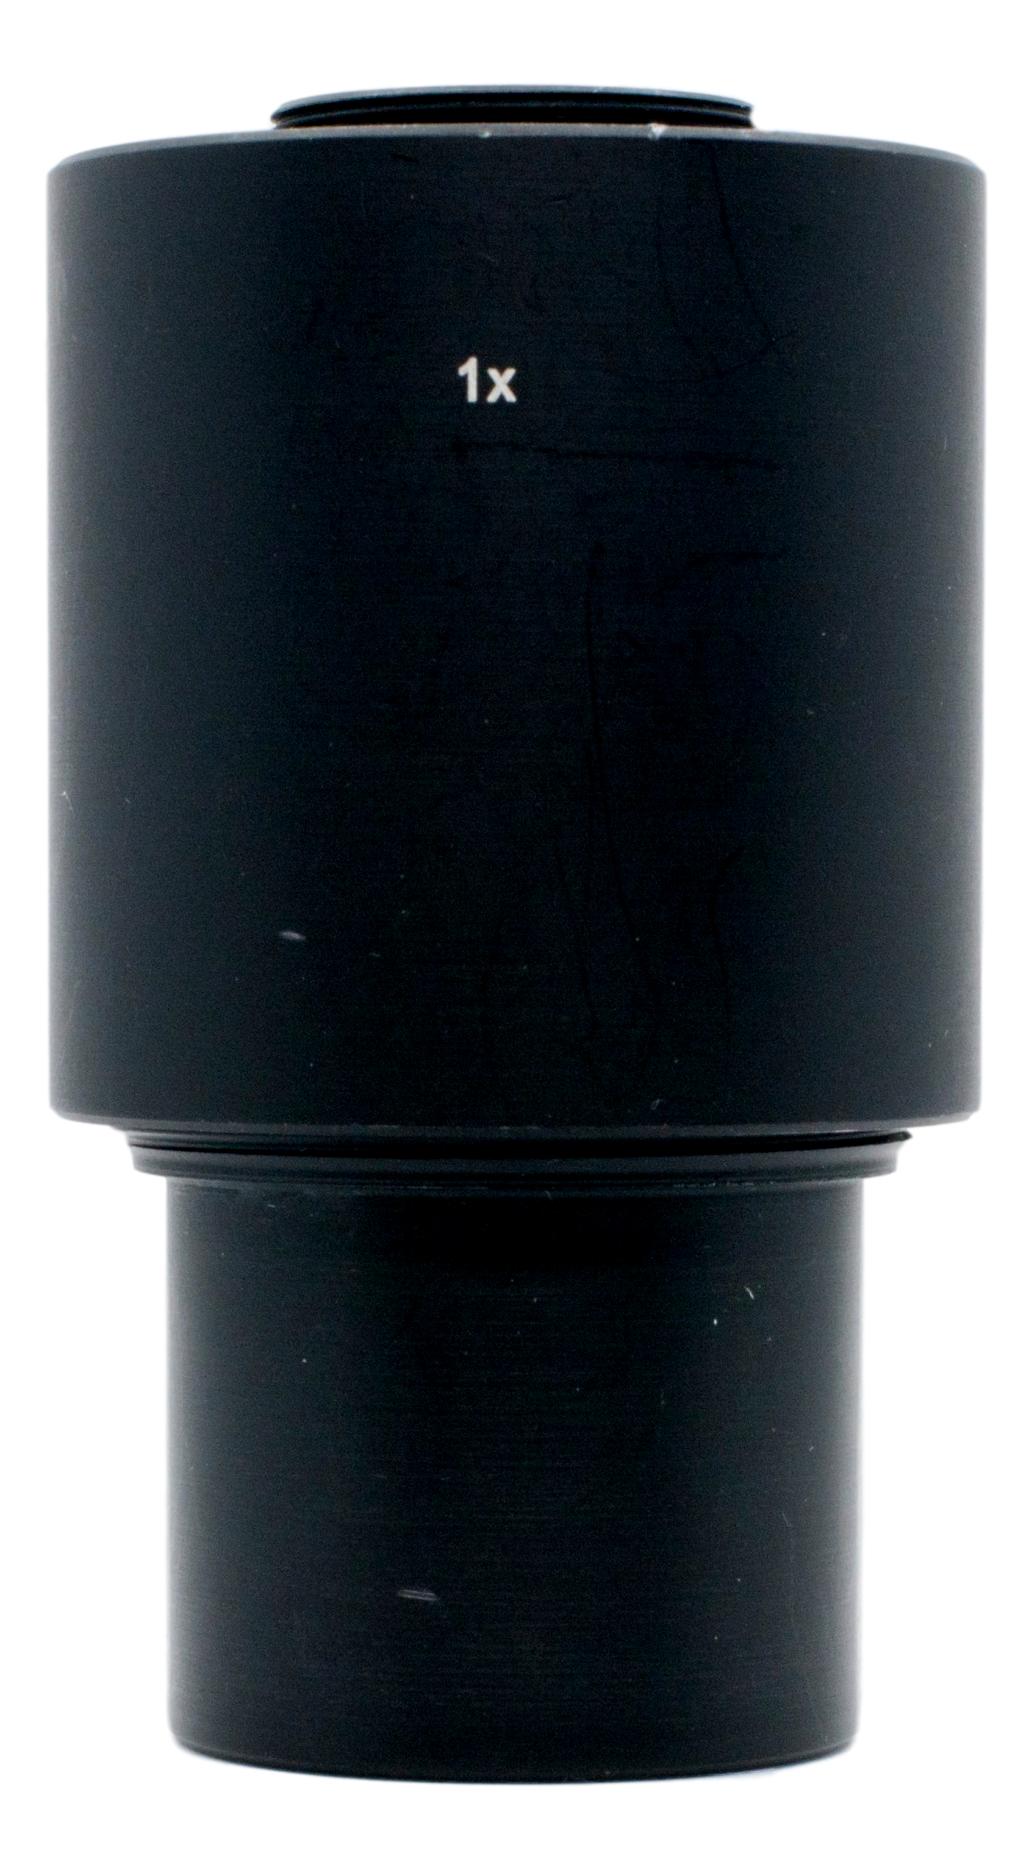 .Leica Video Viewing Tube C-Mount 1x for DM E Microscope